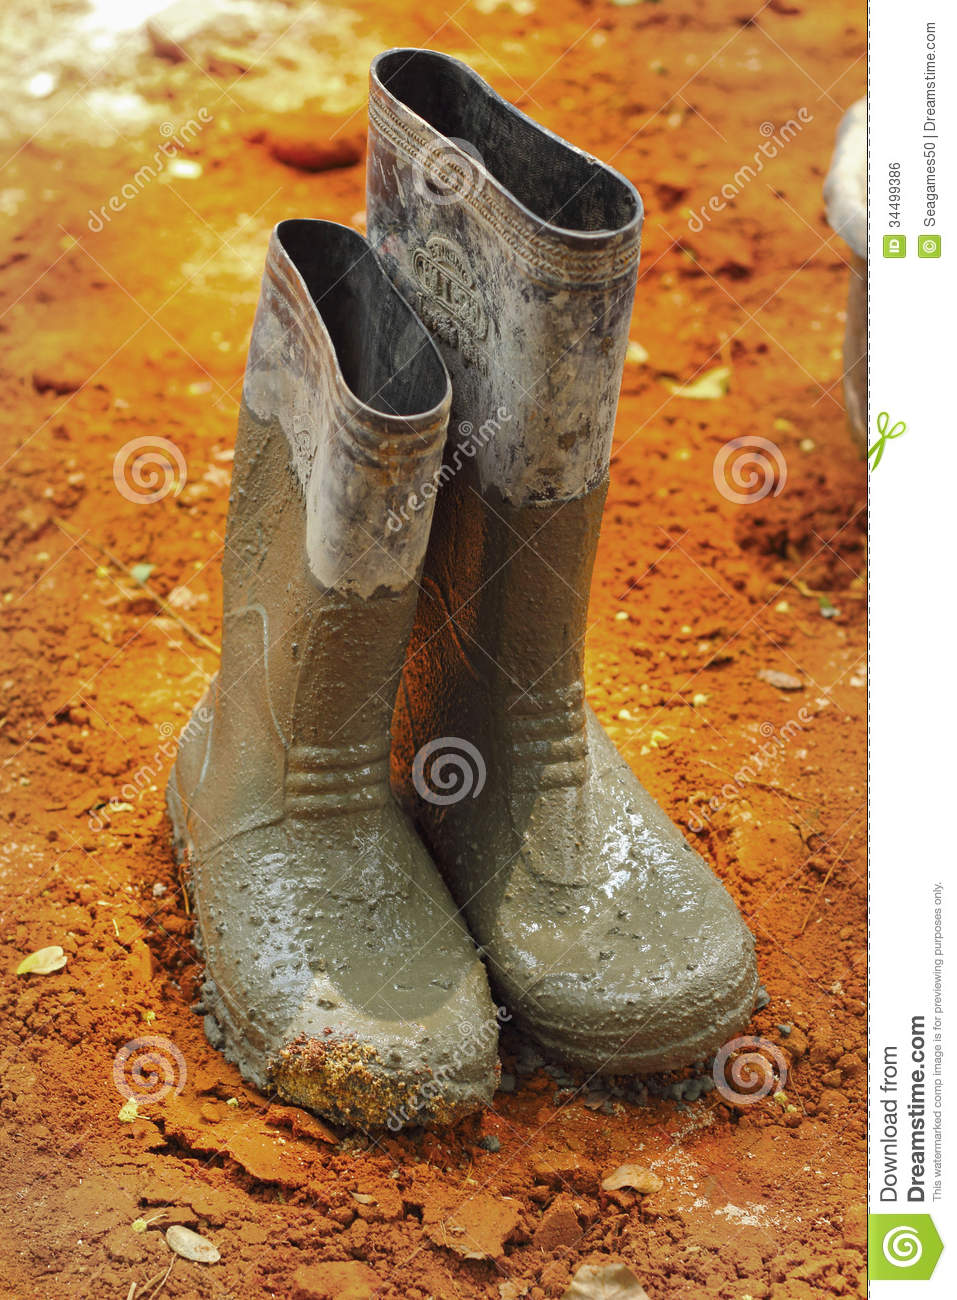 Shoes Rubber Boots On The Ground  Royalty Free Stock Image   Image